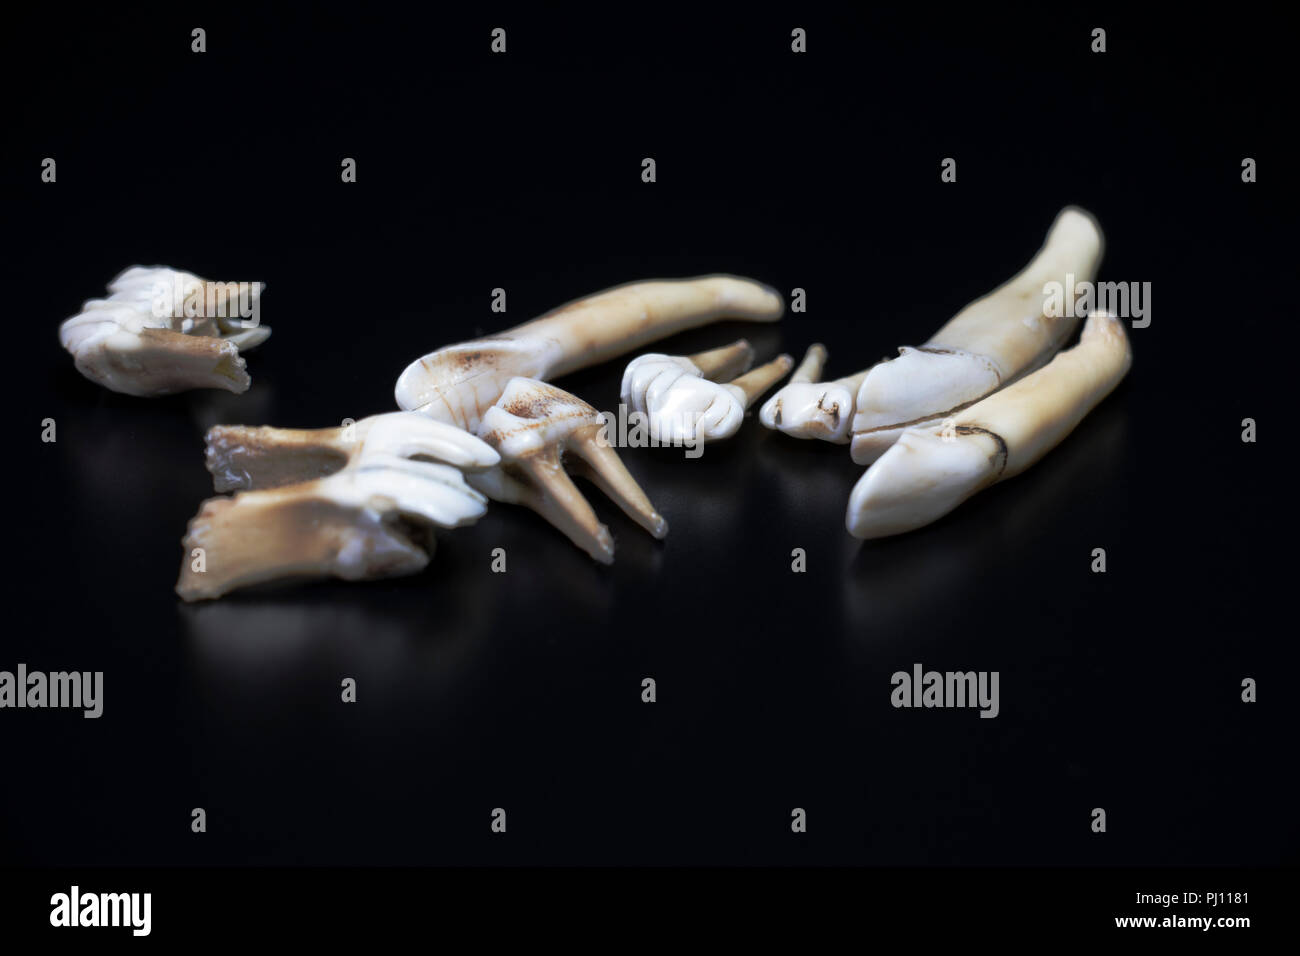 Animal teeth reflecting on black background. Different sizes of pulled teeth  from a deer, elk, or moose Stock Photo - Alamy